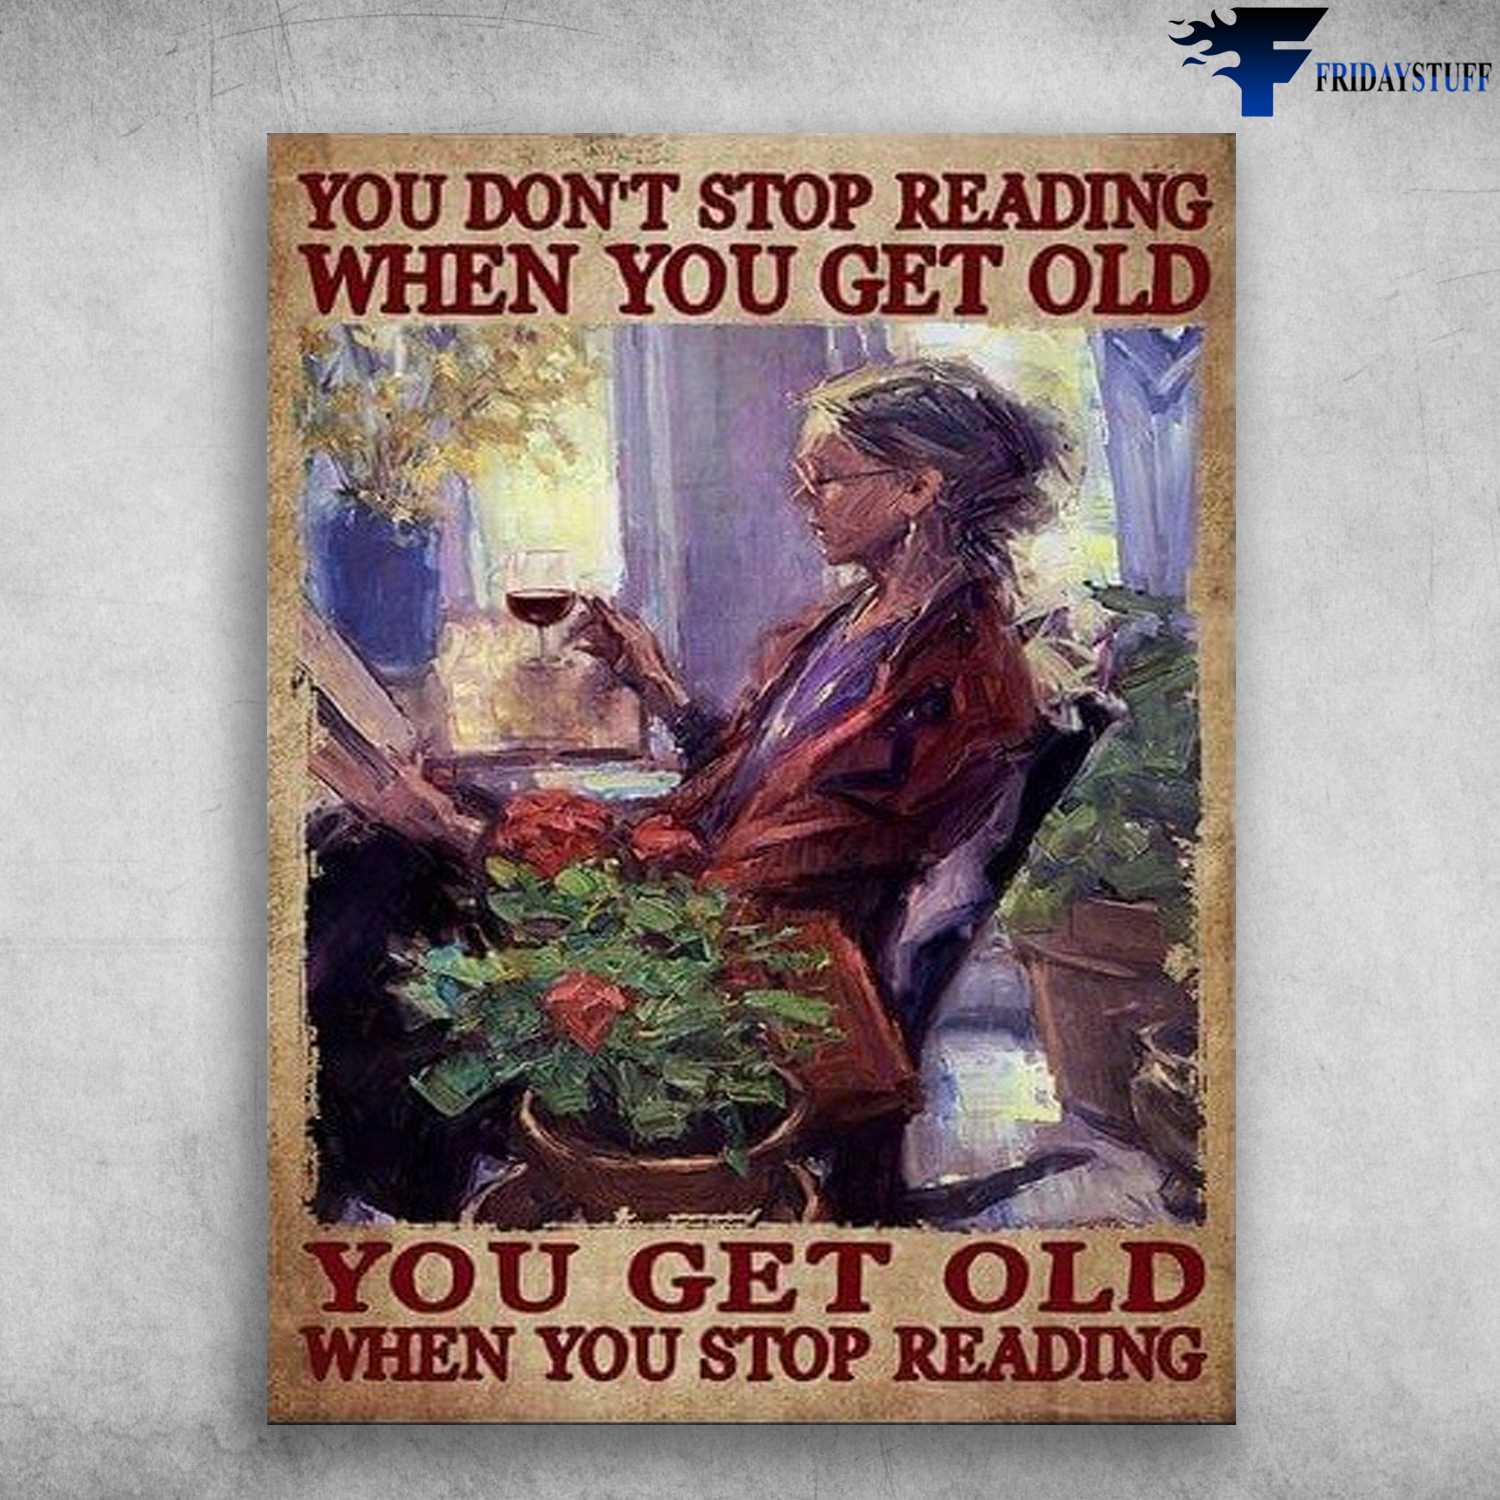 Book And Wine, Book Reading - You Don't Stop Reading When You Get Old, You Get Old When You Stop Reading